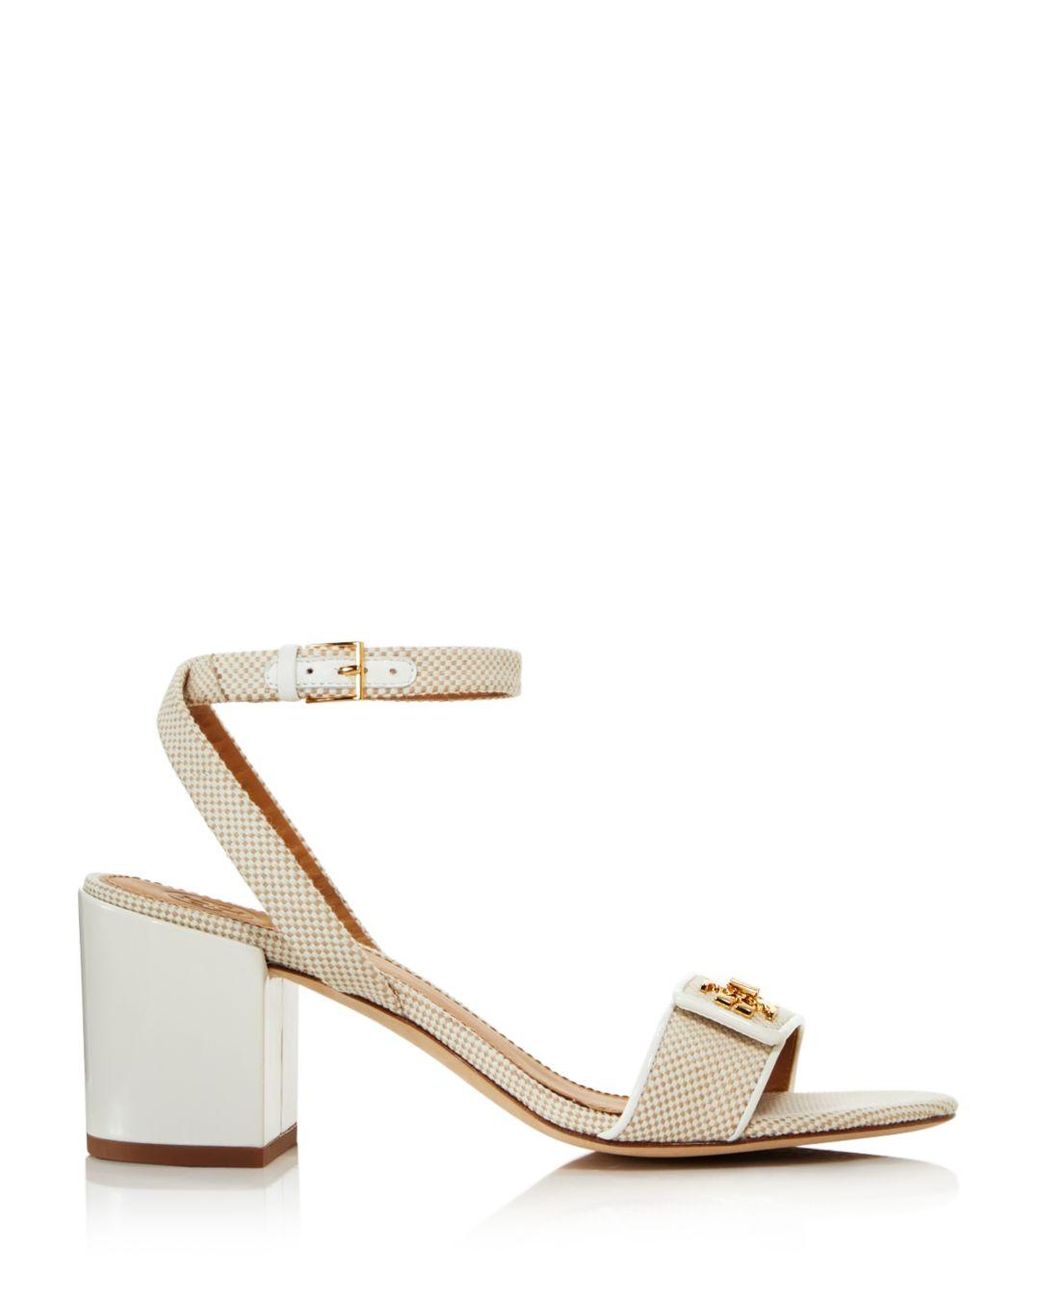 Tory Burch Kira Canvas And Leather Sandals in Natural | Lyst